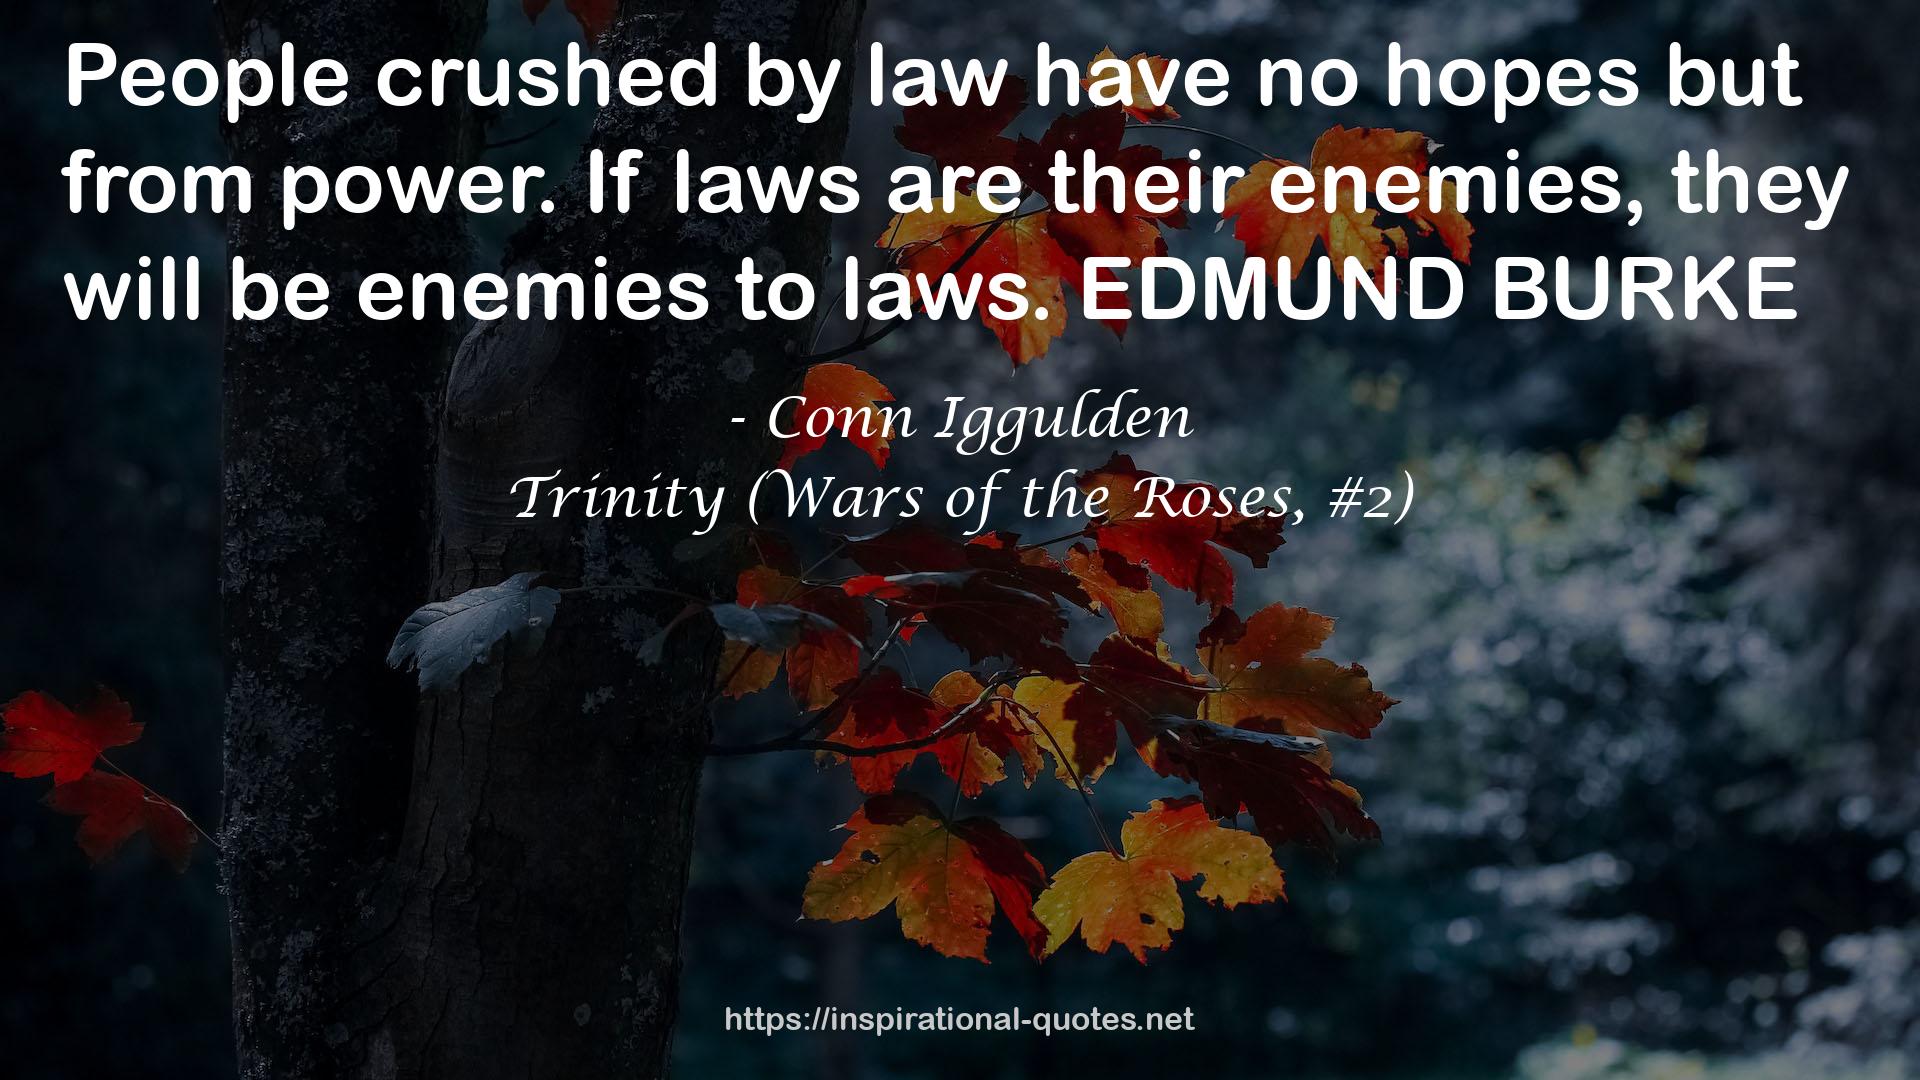 Trinity (Wars of the Roses, #2) QUOTES